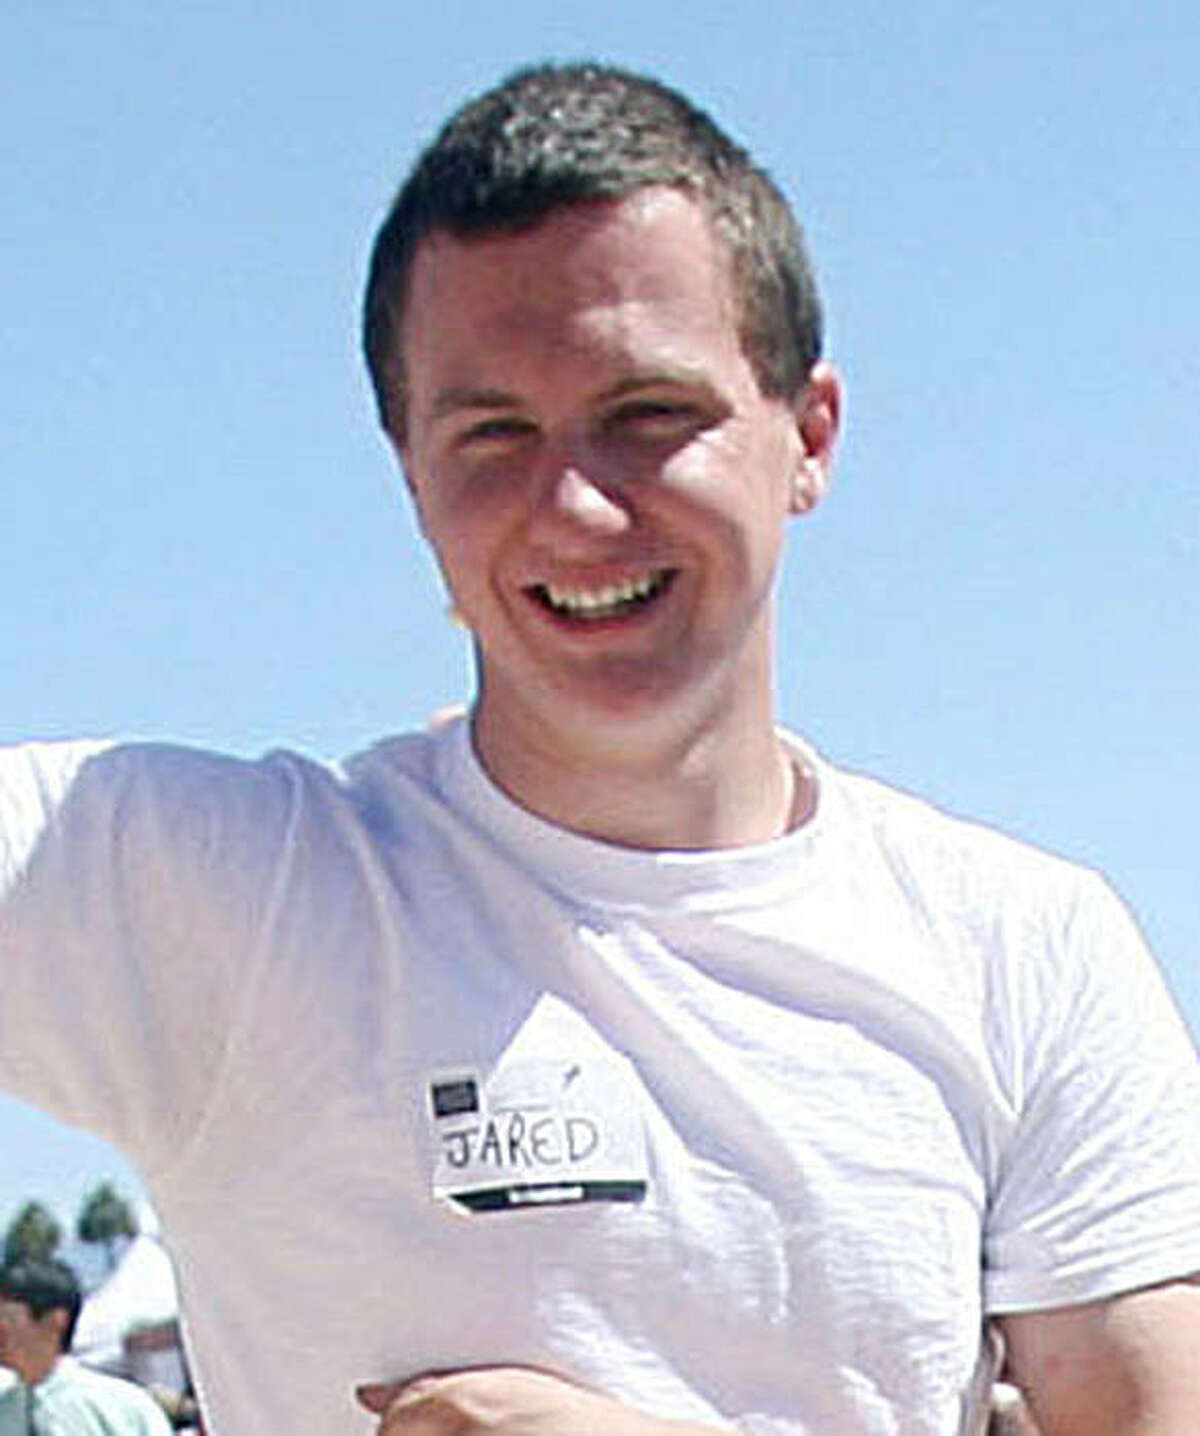 This March 2010 photo shows a man identified as Jared L. Loughner at the 2010 Tucson Festival of Books in Tucson, Ariz. The Arizona Daily Star, a festival sponsor, confirmed from their records that the subject's address matches one under investigation by police after a shooting in Tucson that left U.S. Rep. Gabrielle Giffords wounded and at least five others dead. Police say a suspect is in custody, and he was identified by people familiar with the investigation as Jared Loughner, 22, of Tucson. (AP Photo/Arizona Daily Star, Mamta Popat) NO MAGS, NO SALES, MANDATORY CREDIT